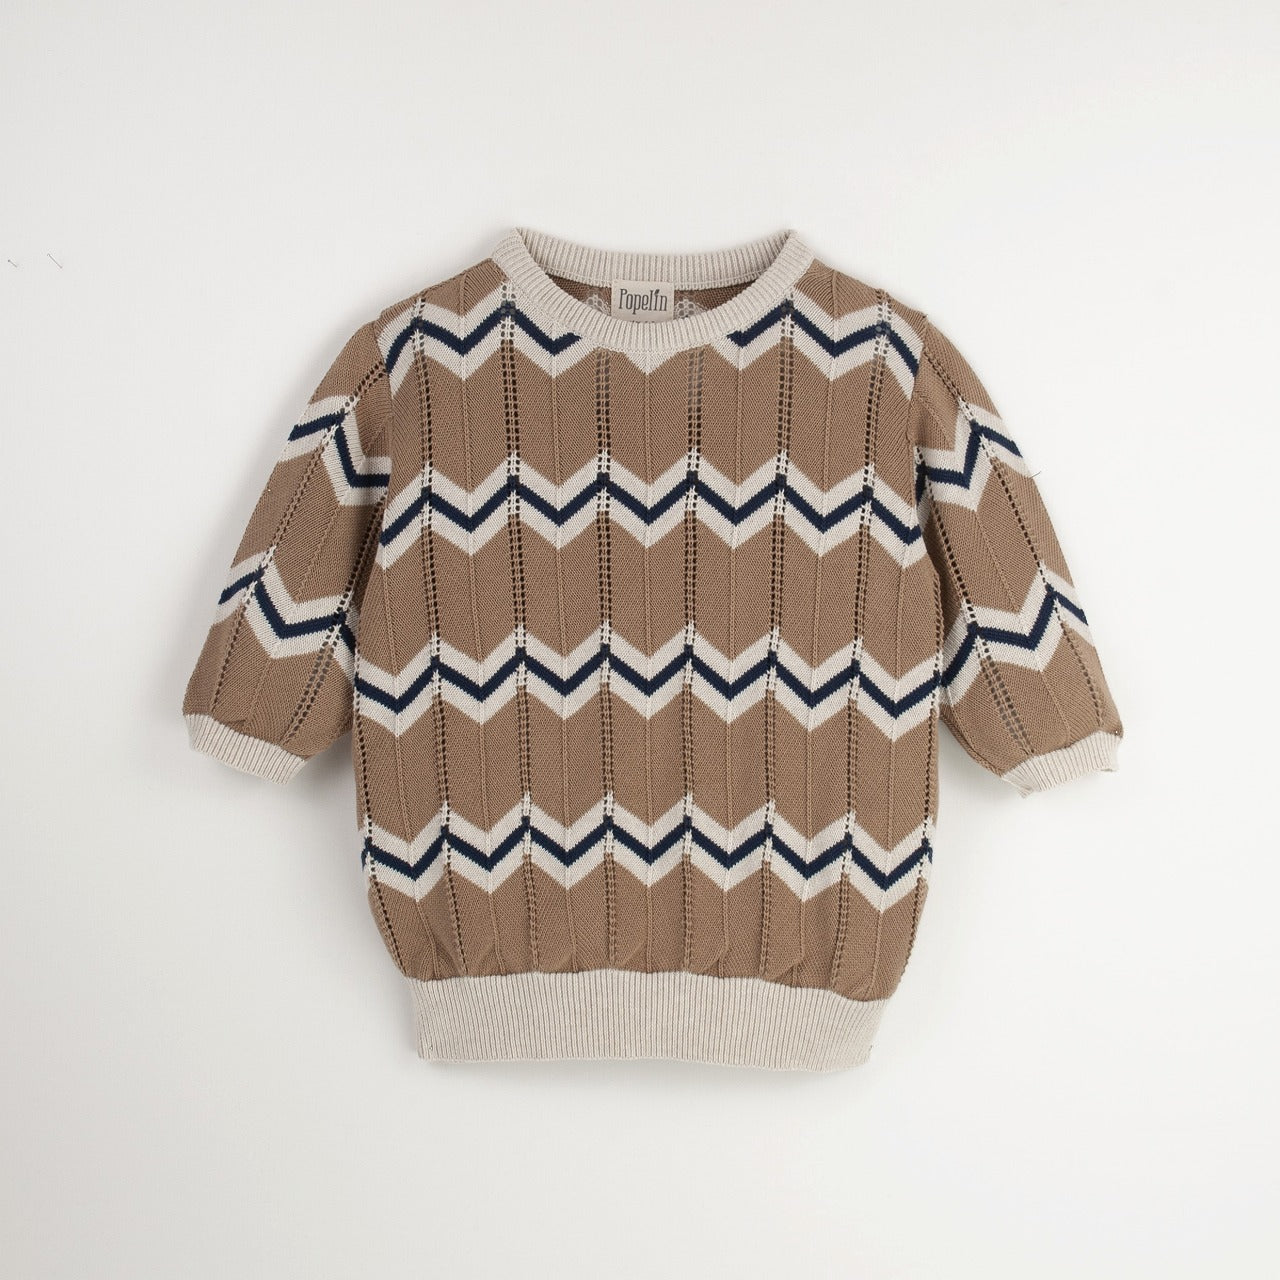 【Popelin】【30%OFF】Brown openwork knit jersey ニットジャージー 12/18m,18/24m  | Coucoubebe/ククベベ